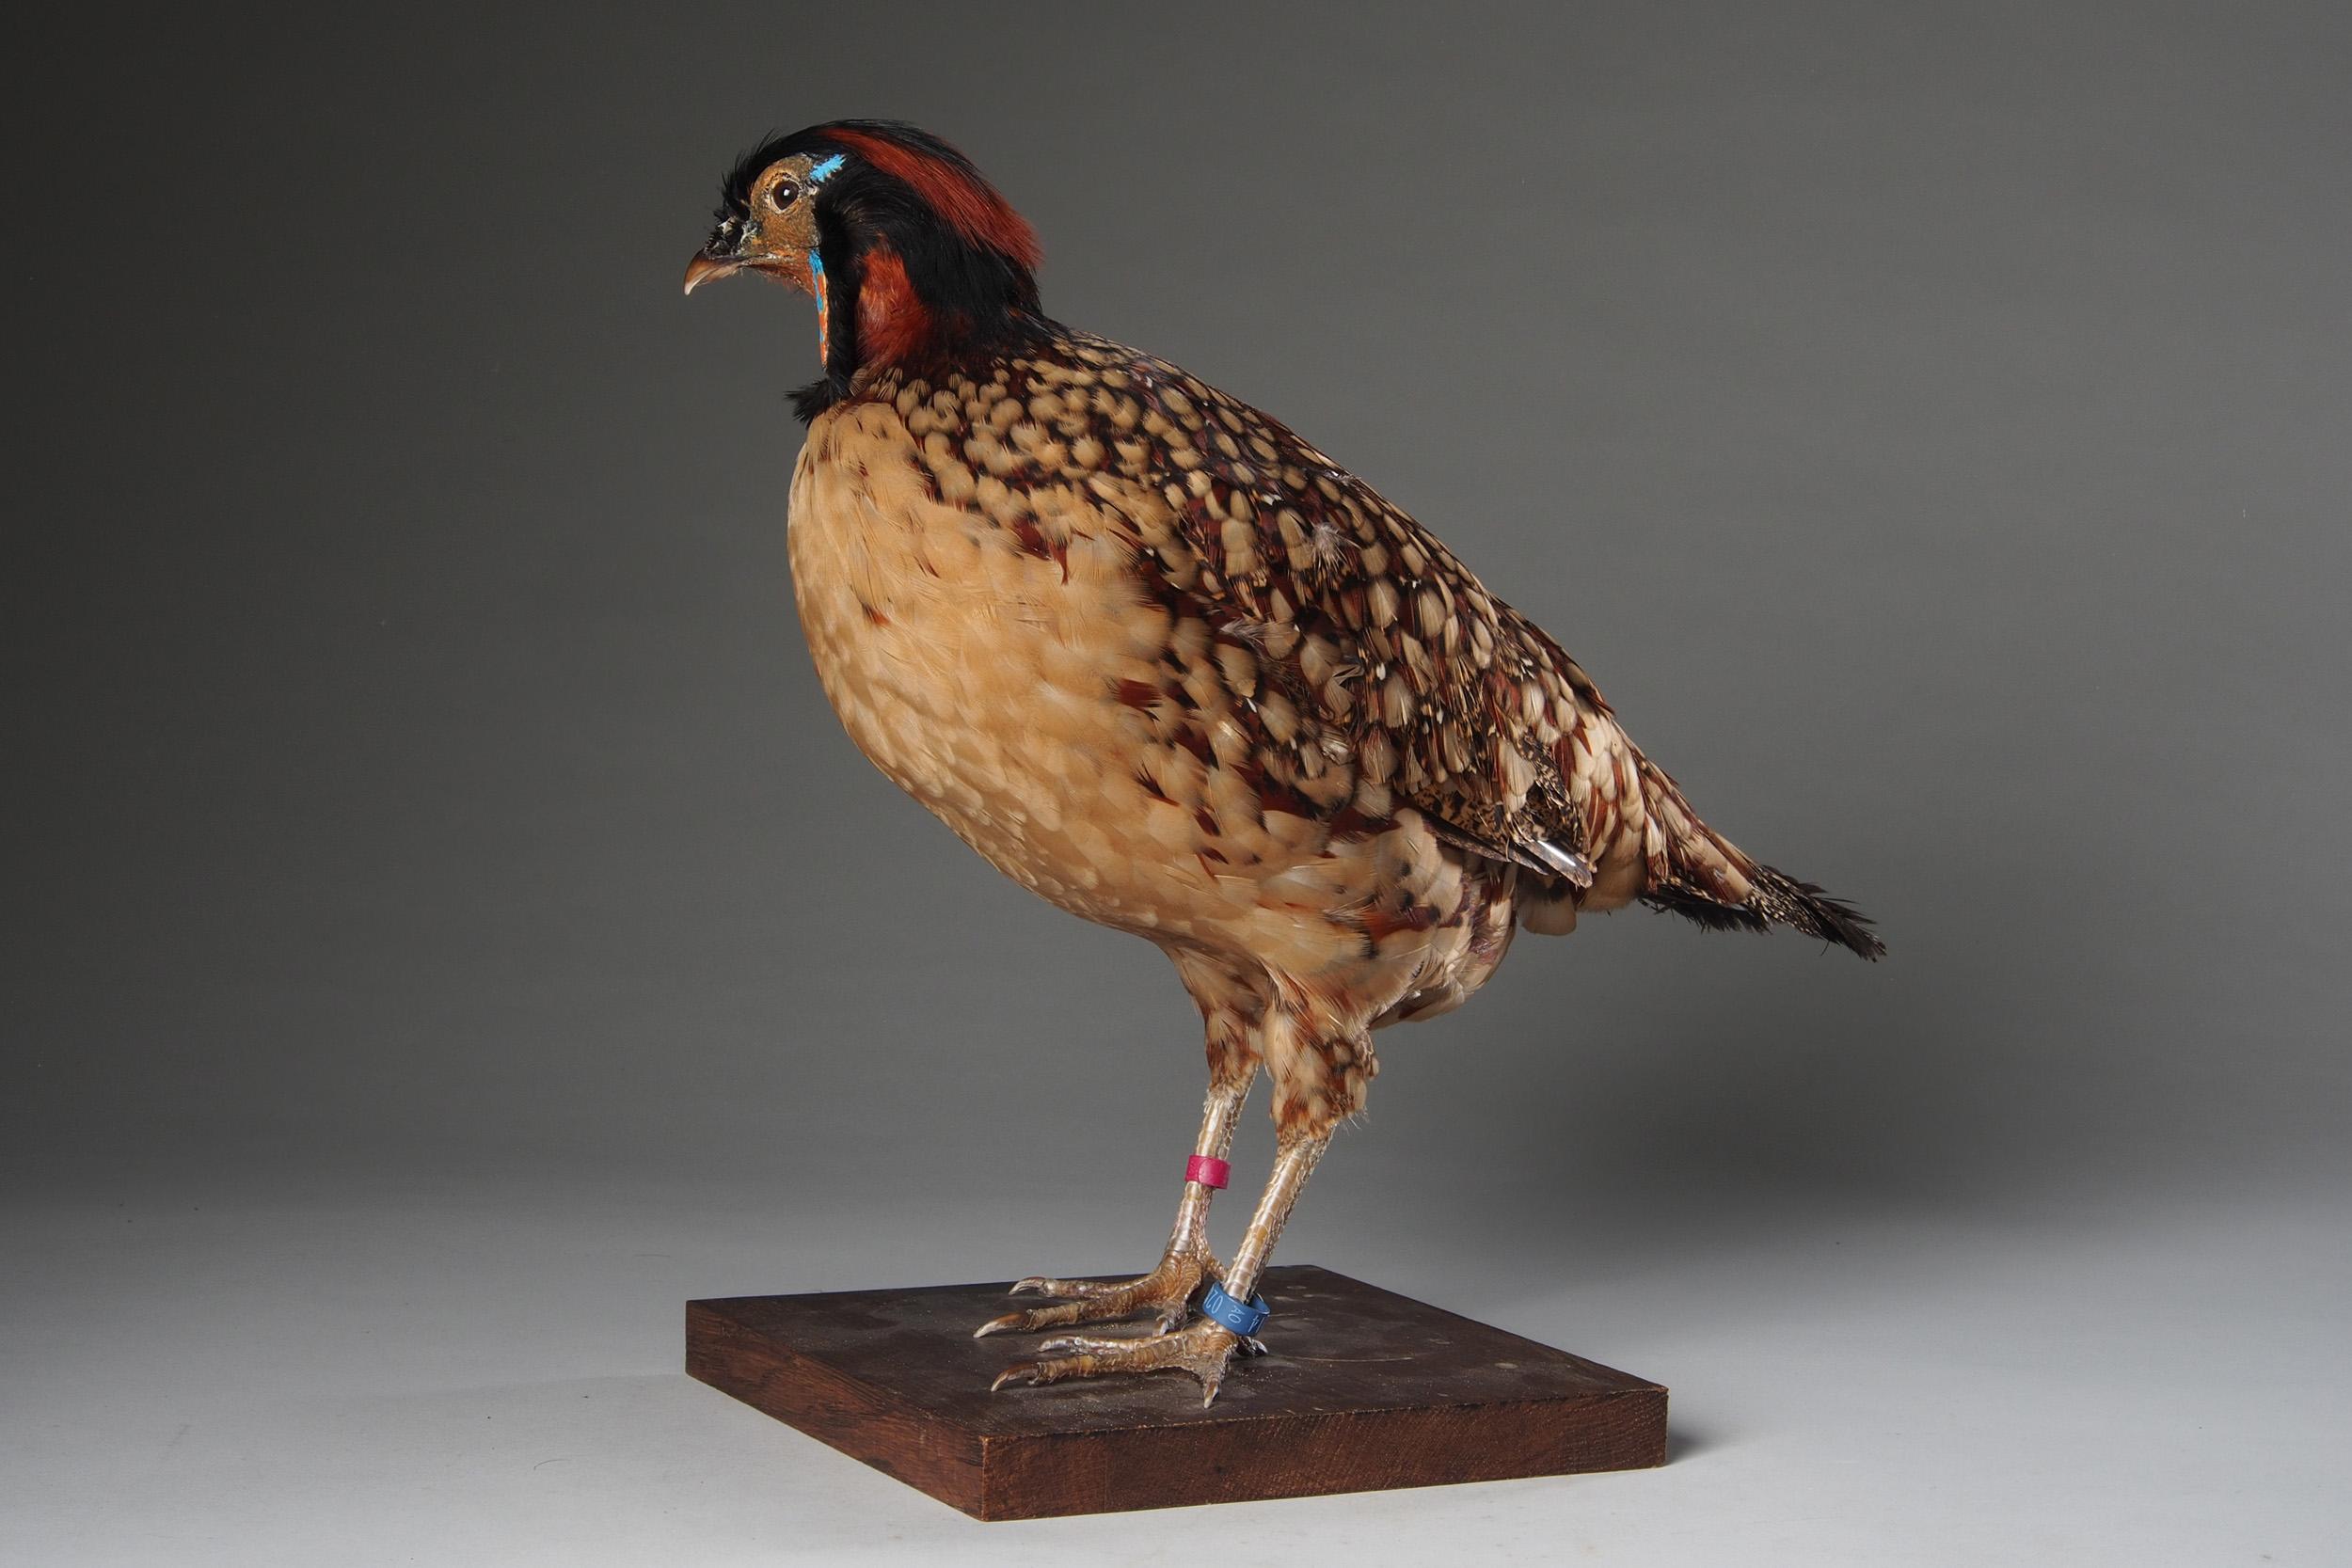 Temminck's Tragopan is a medium-sized pheasant. The male is a stocky red-and-orange bird with white-spotted plumage, black bill and pink legs. It has a bare blue facial skin, inflatable dark-blue lappet and horns. The female is a white-spotted brown